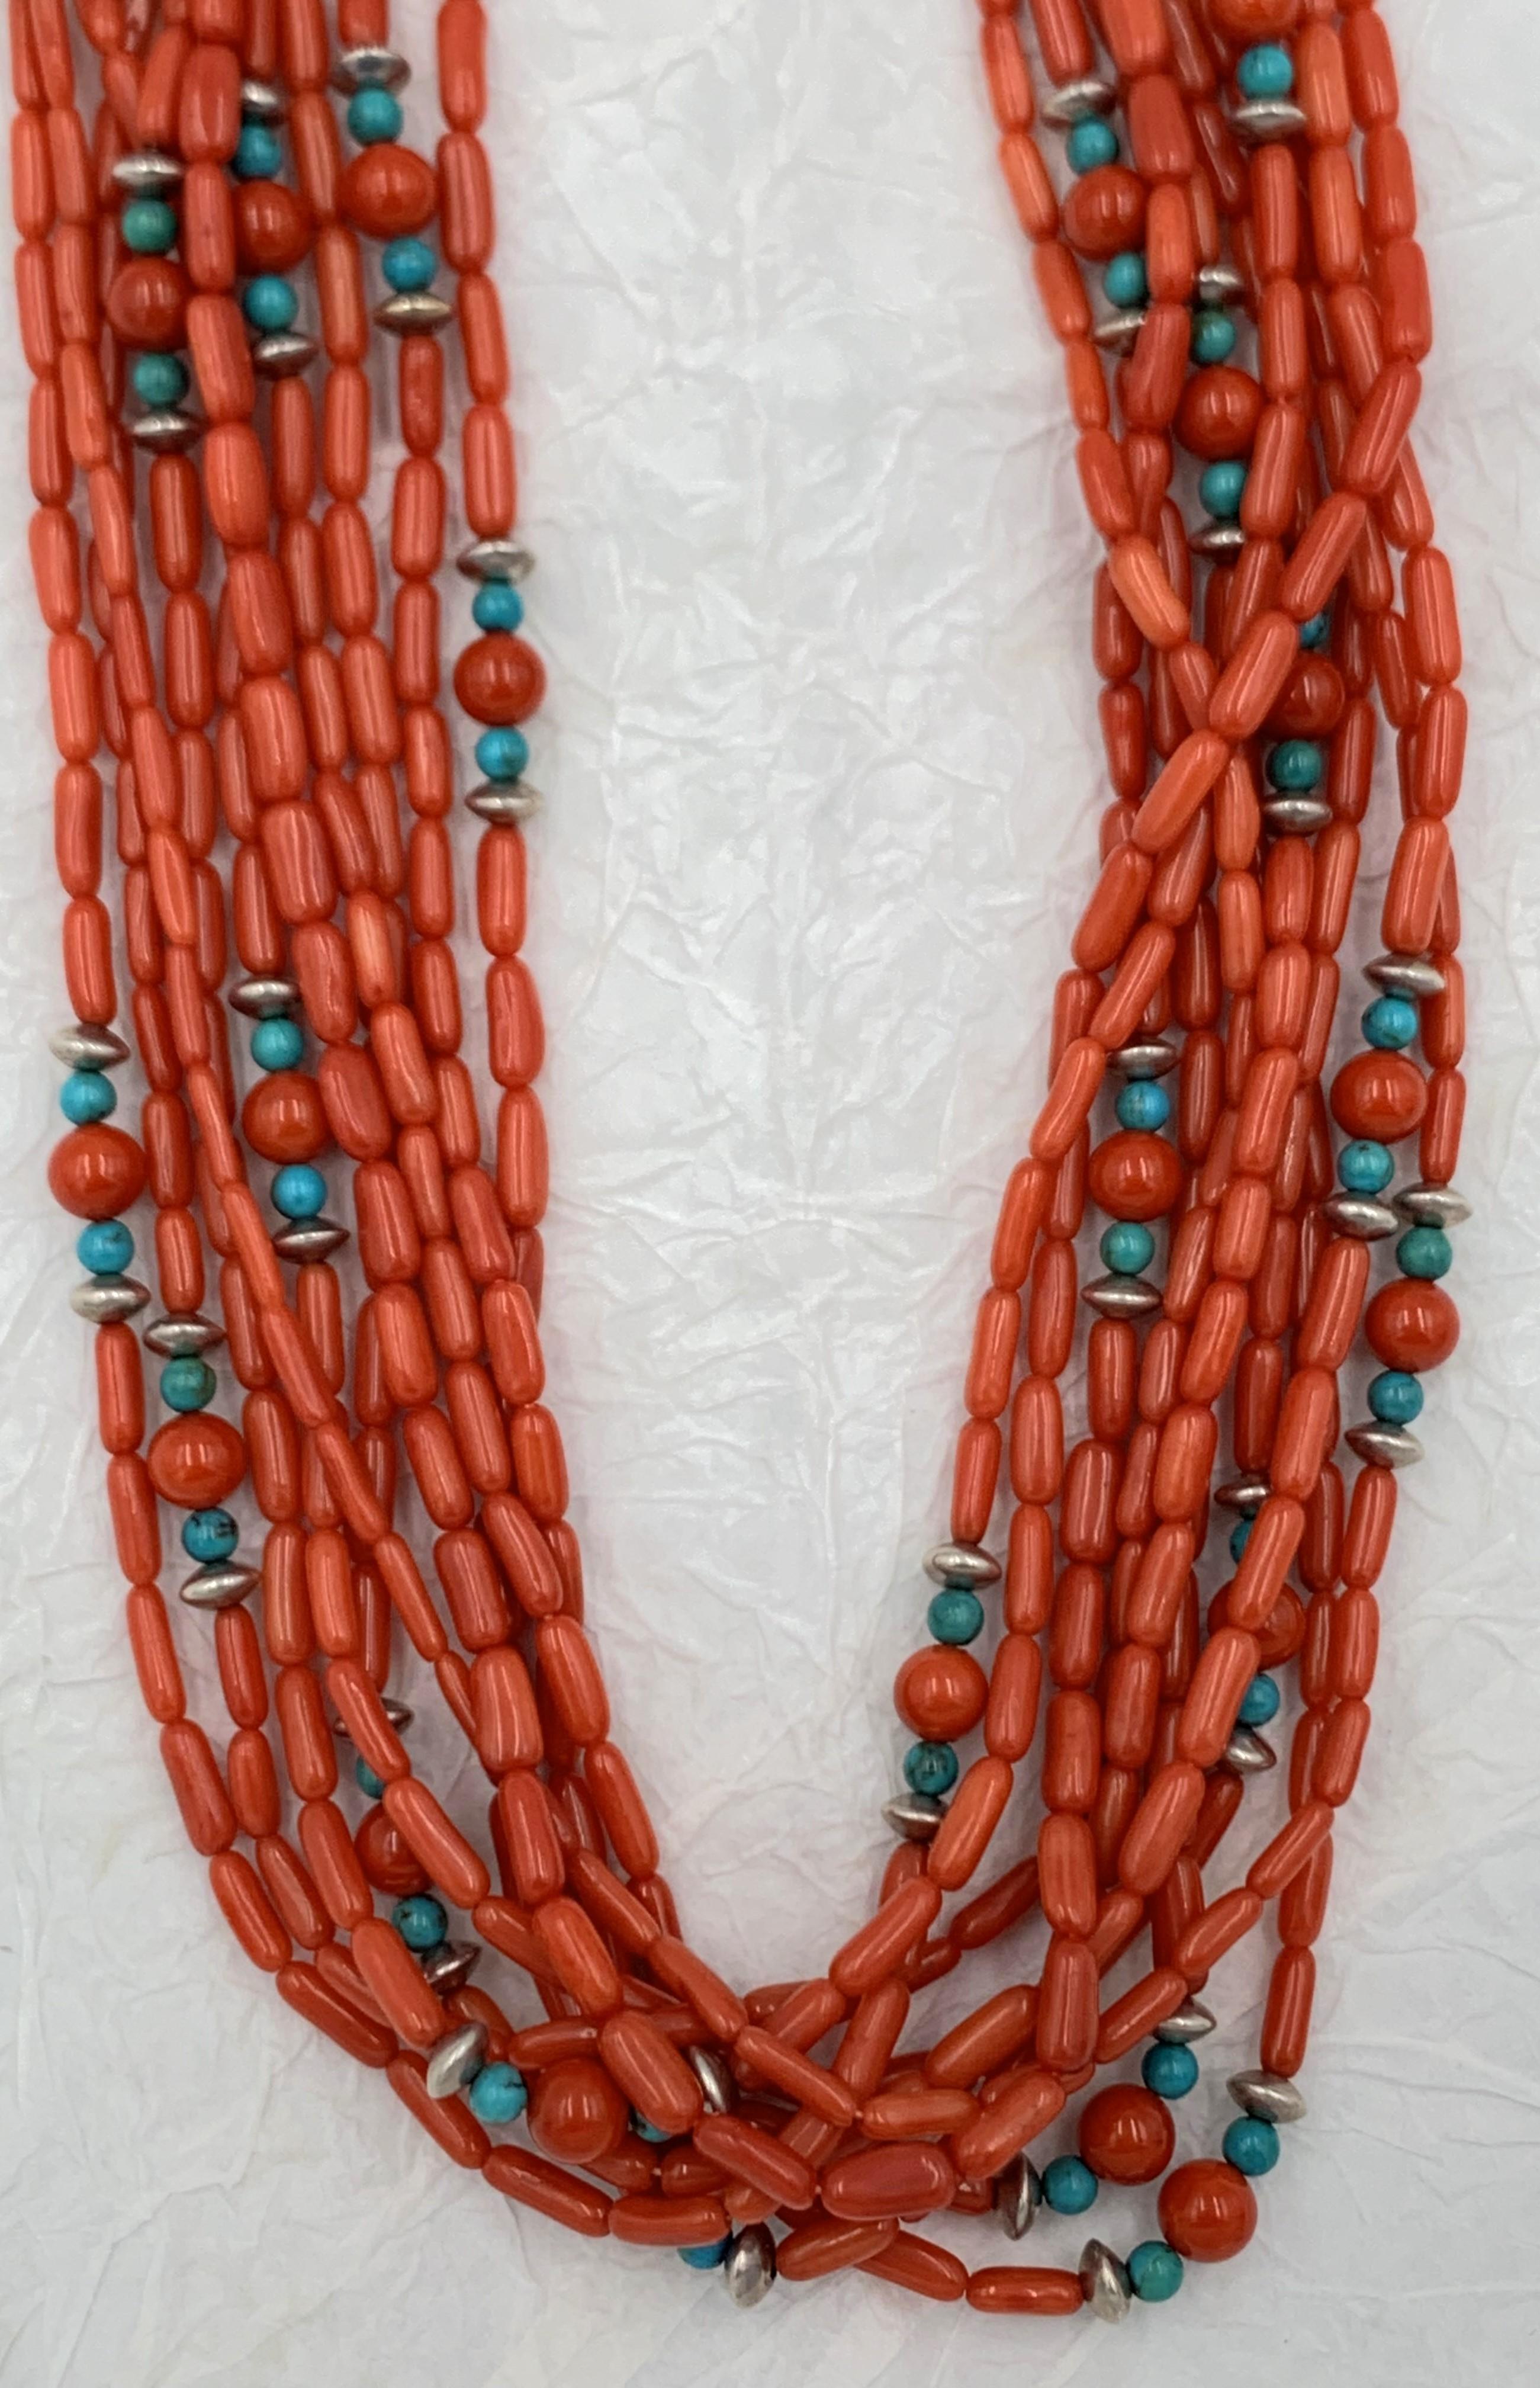 This beautiful necklace has 10 strands of natural coral beads in shades red-orange. Interspersed amongst the coral are turquoise stones and silver. 


#J1786 @ S